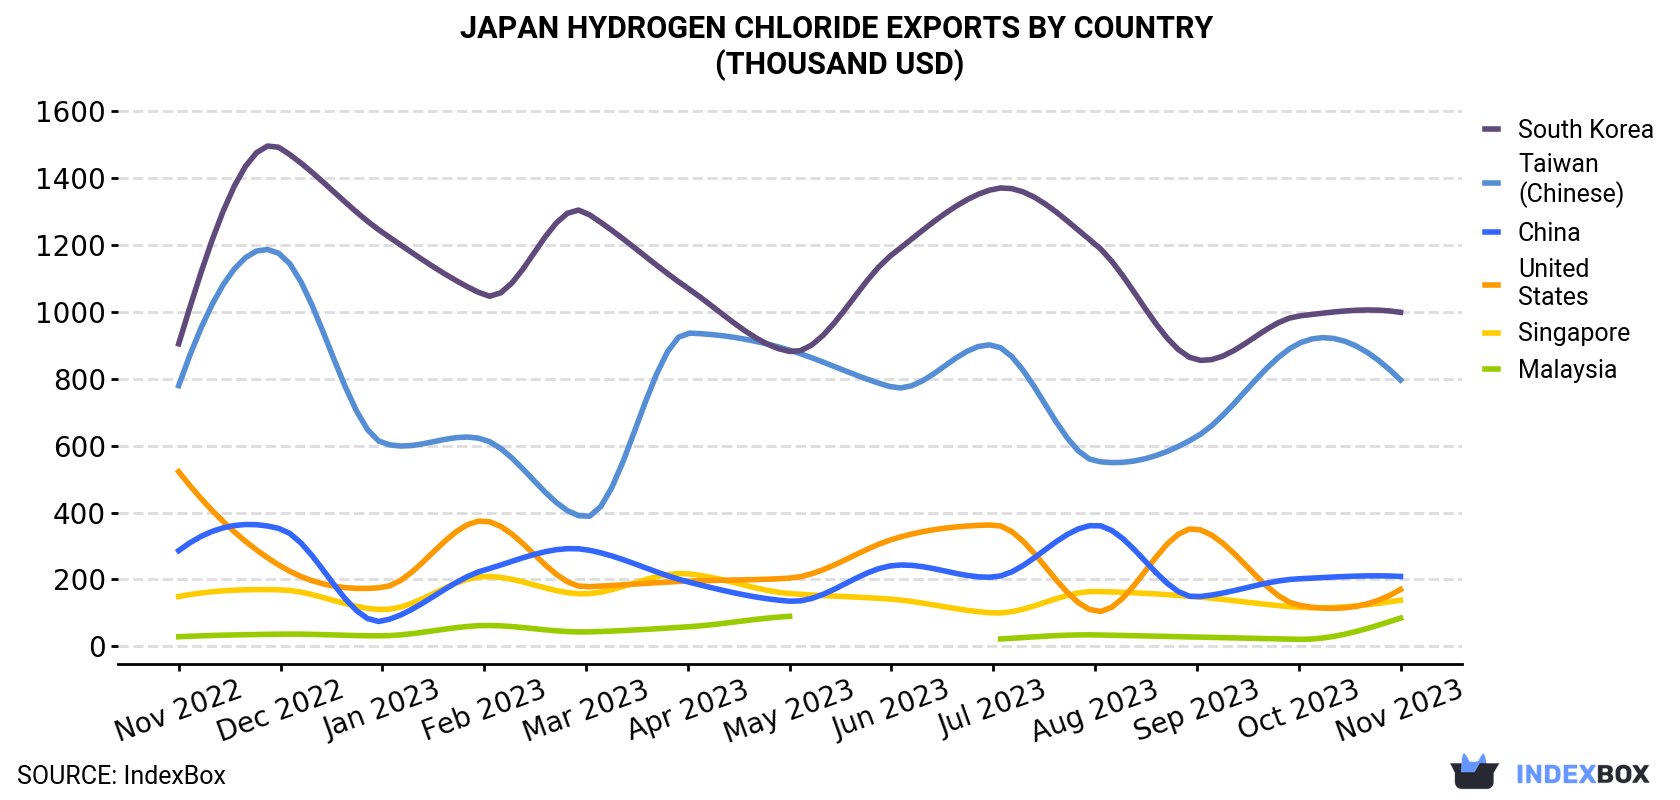 Japan Hydrogen Chloride Exports By Country (Thousand USD)